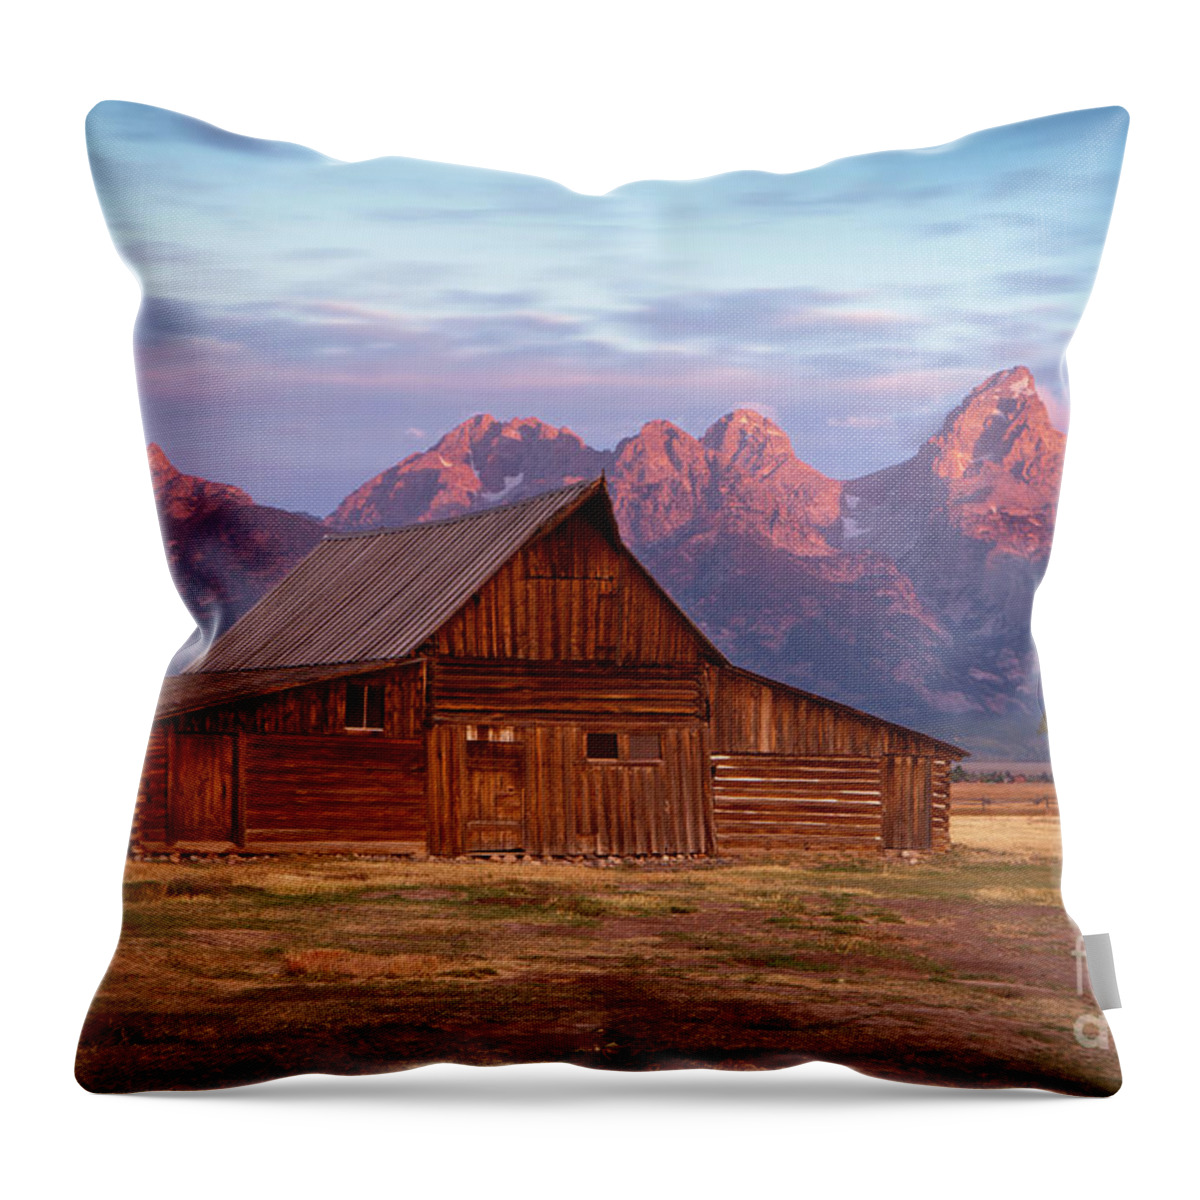 Moulton Throw Pillow featuring the photograph 1486 Moulton Barn by Steve Sturgill